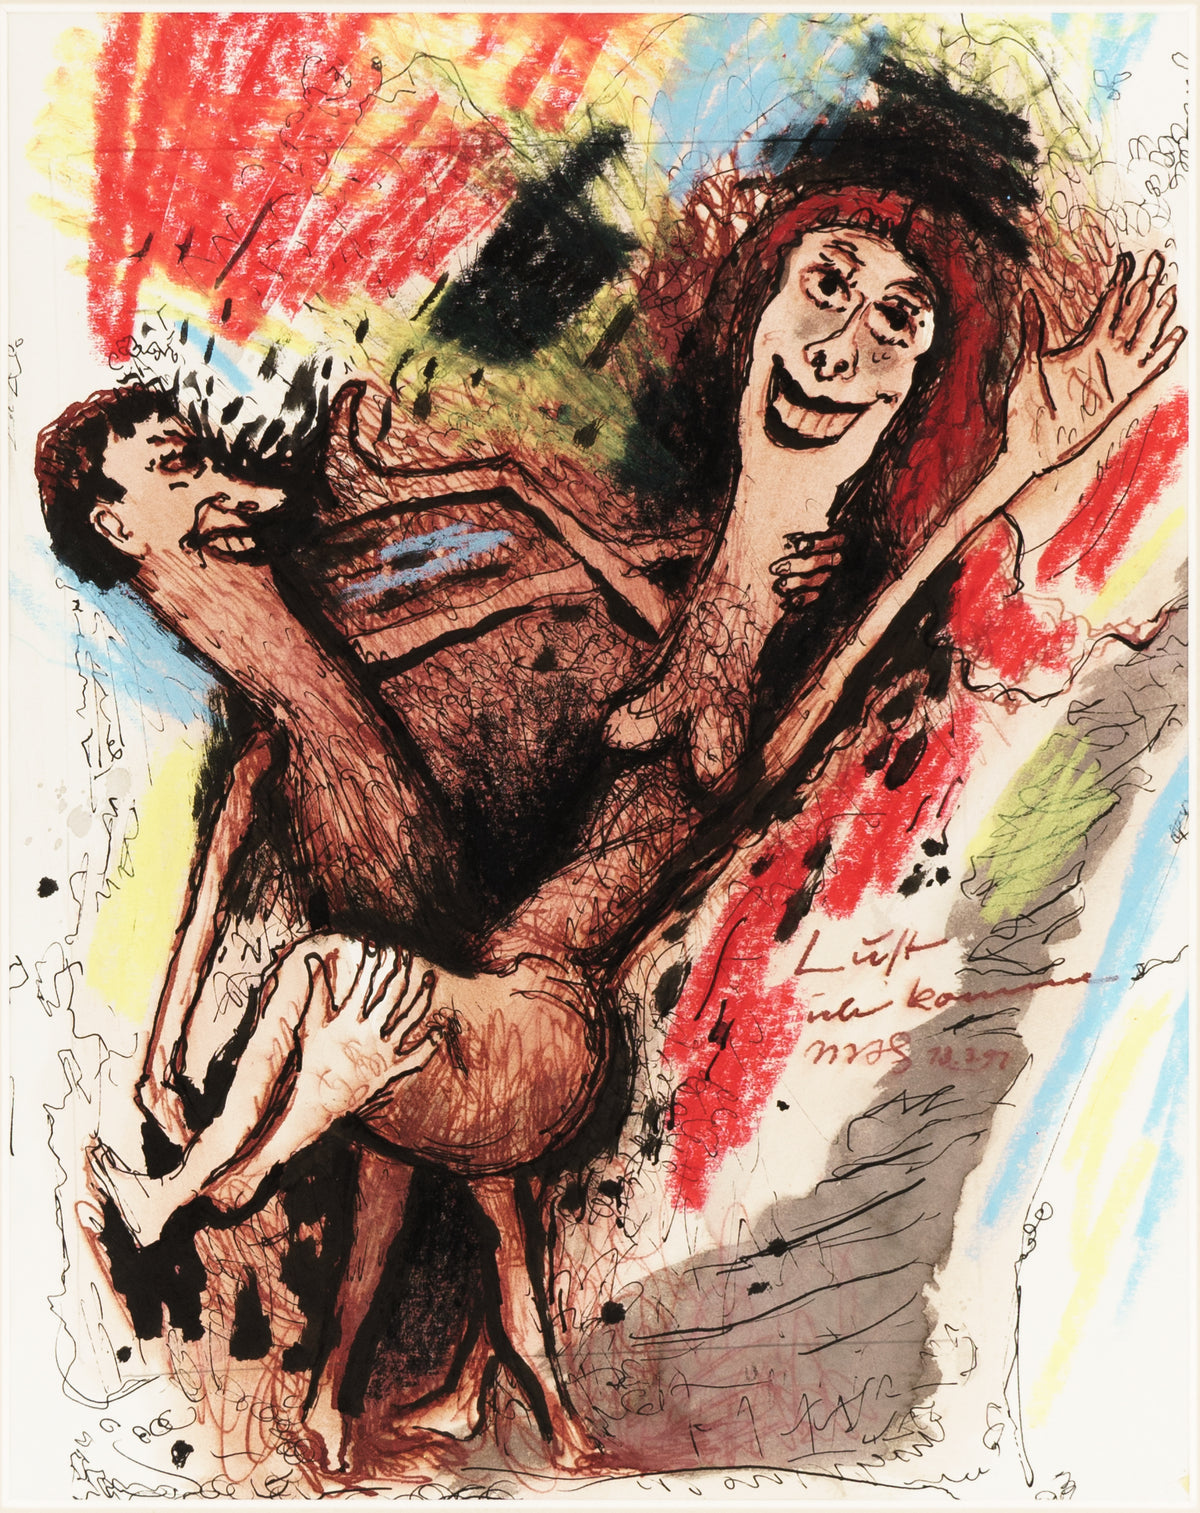 Mathias J. Seib, Watercolor, ink painting, Lust I come/ Lust ich komme